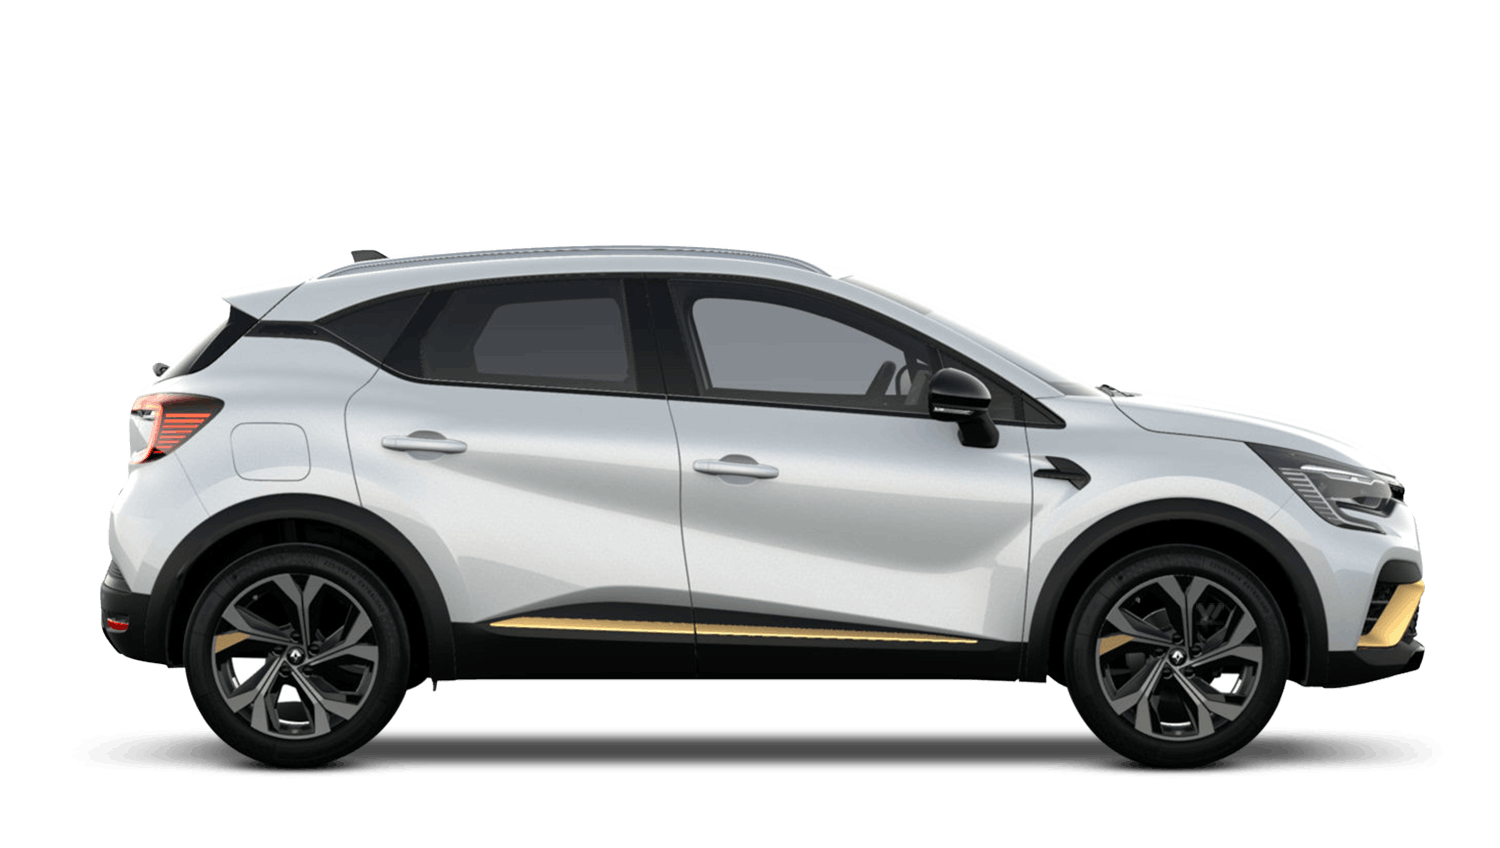 Renault CAPTUR E-Tech Full Hybrid with up to £1,750 finance deposit contribution